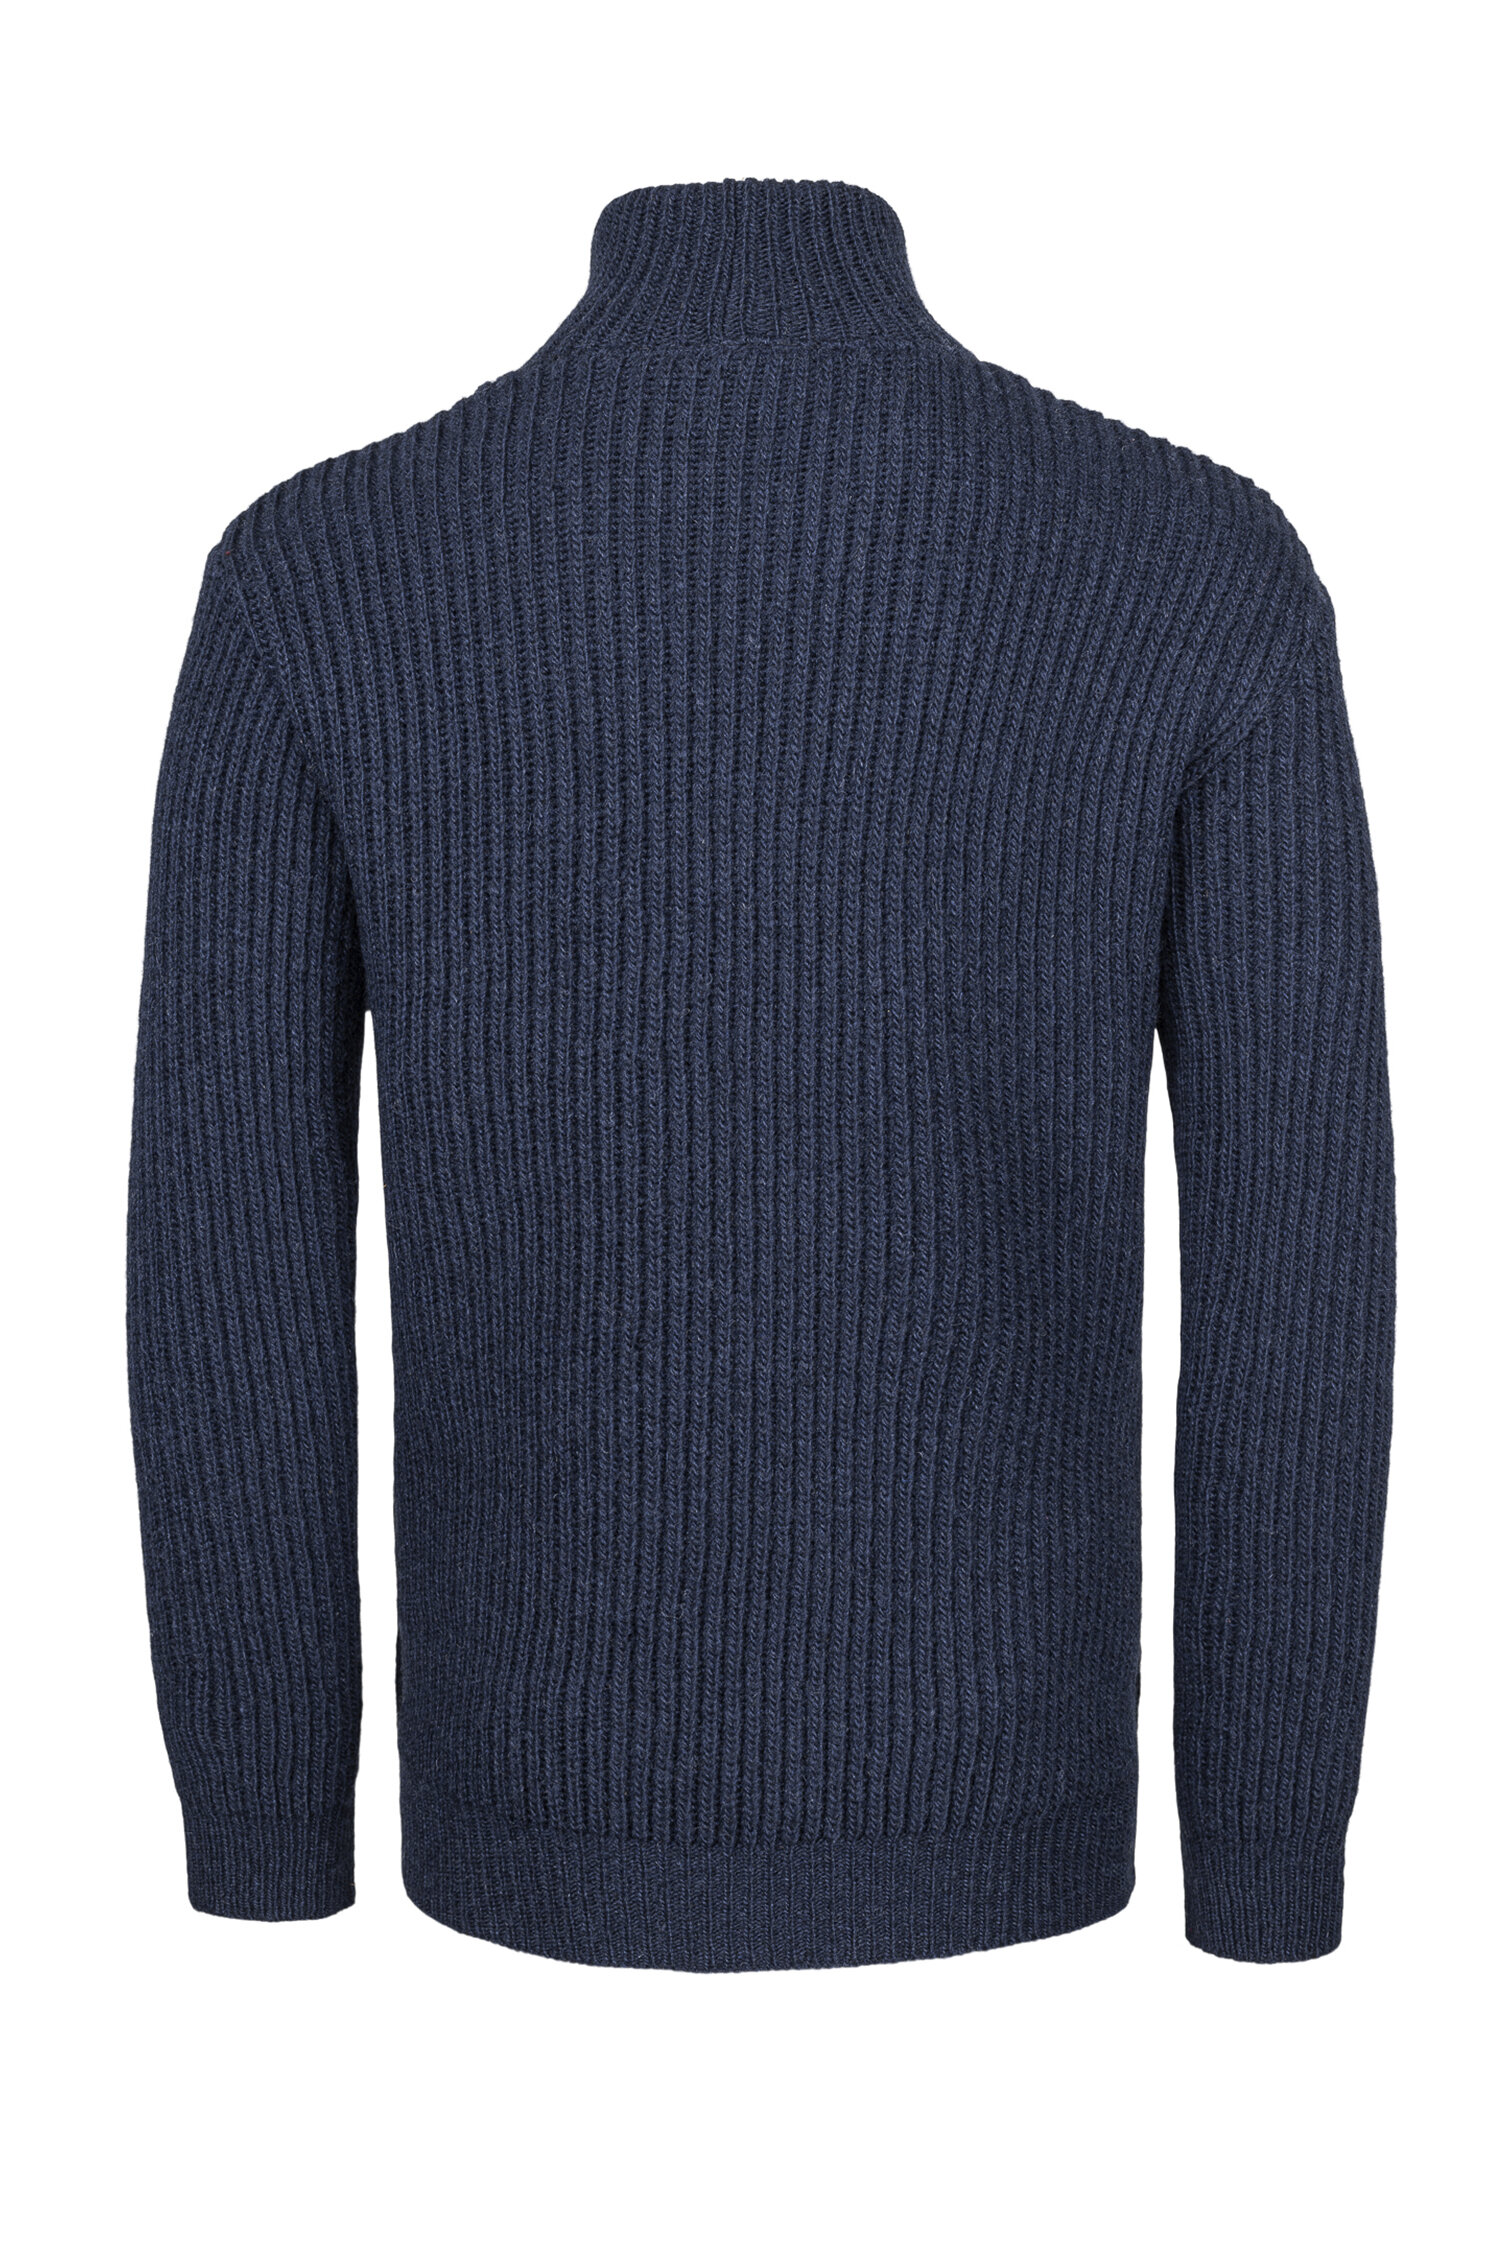 Norlender Knitwear — Classical Norwegian ribbed sweater